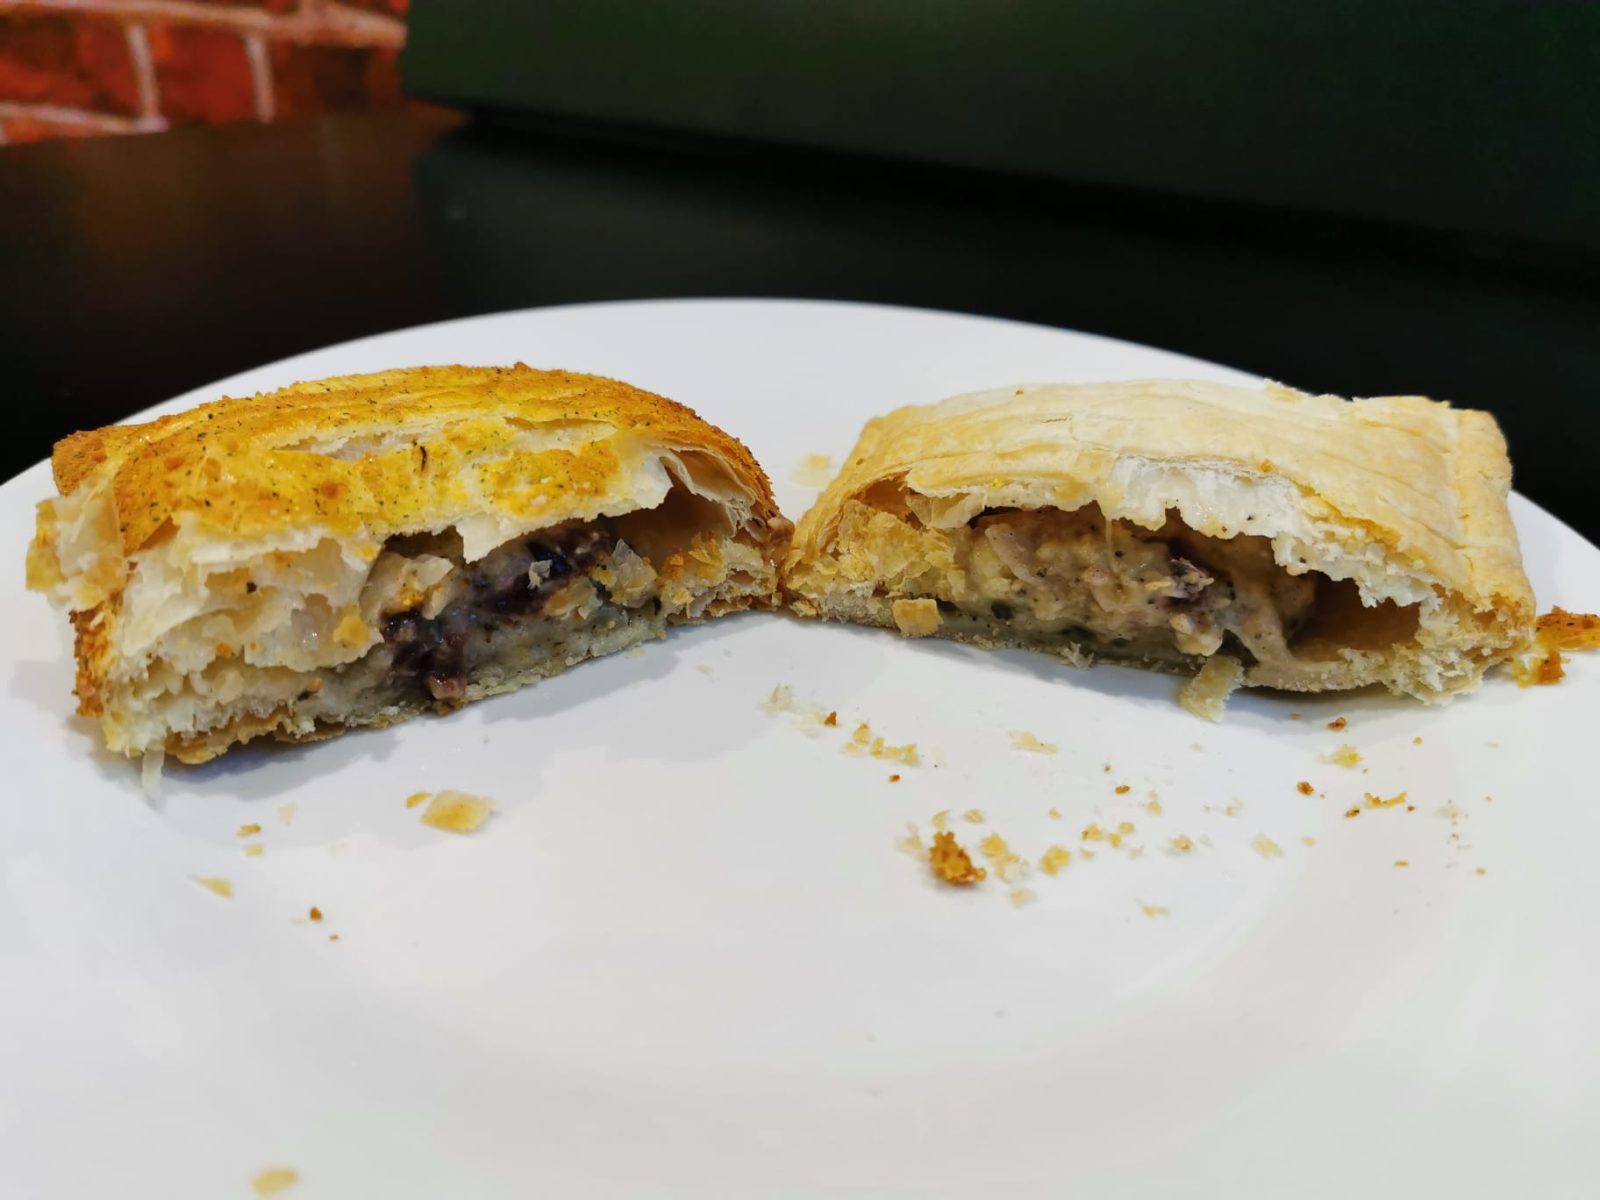 Greggs vegan festive bake launches today &#8211; but how does it compare to the original?, The Manc